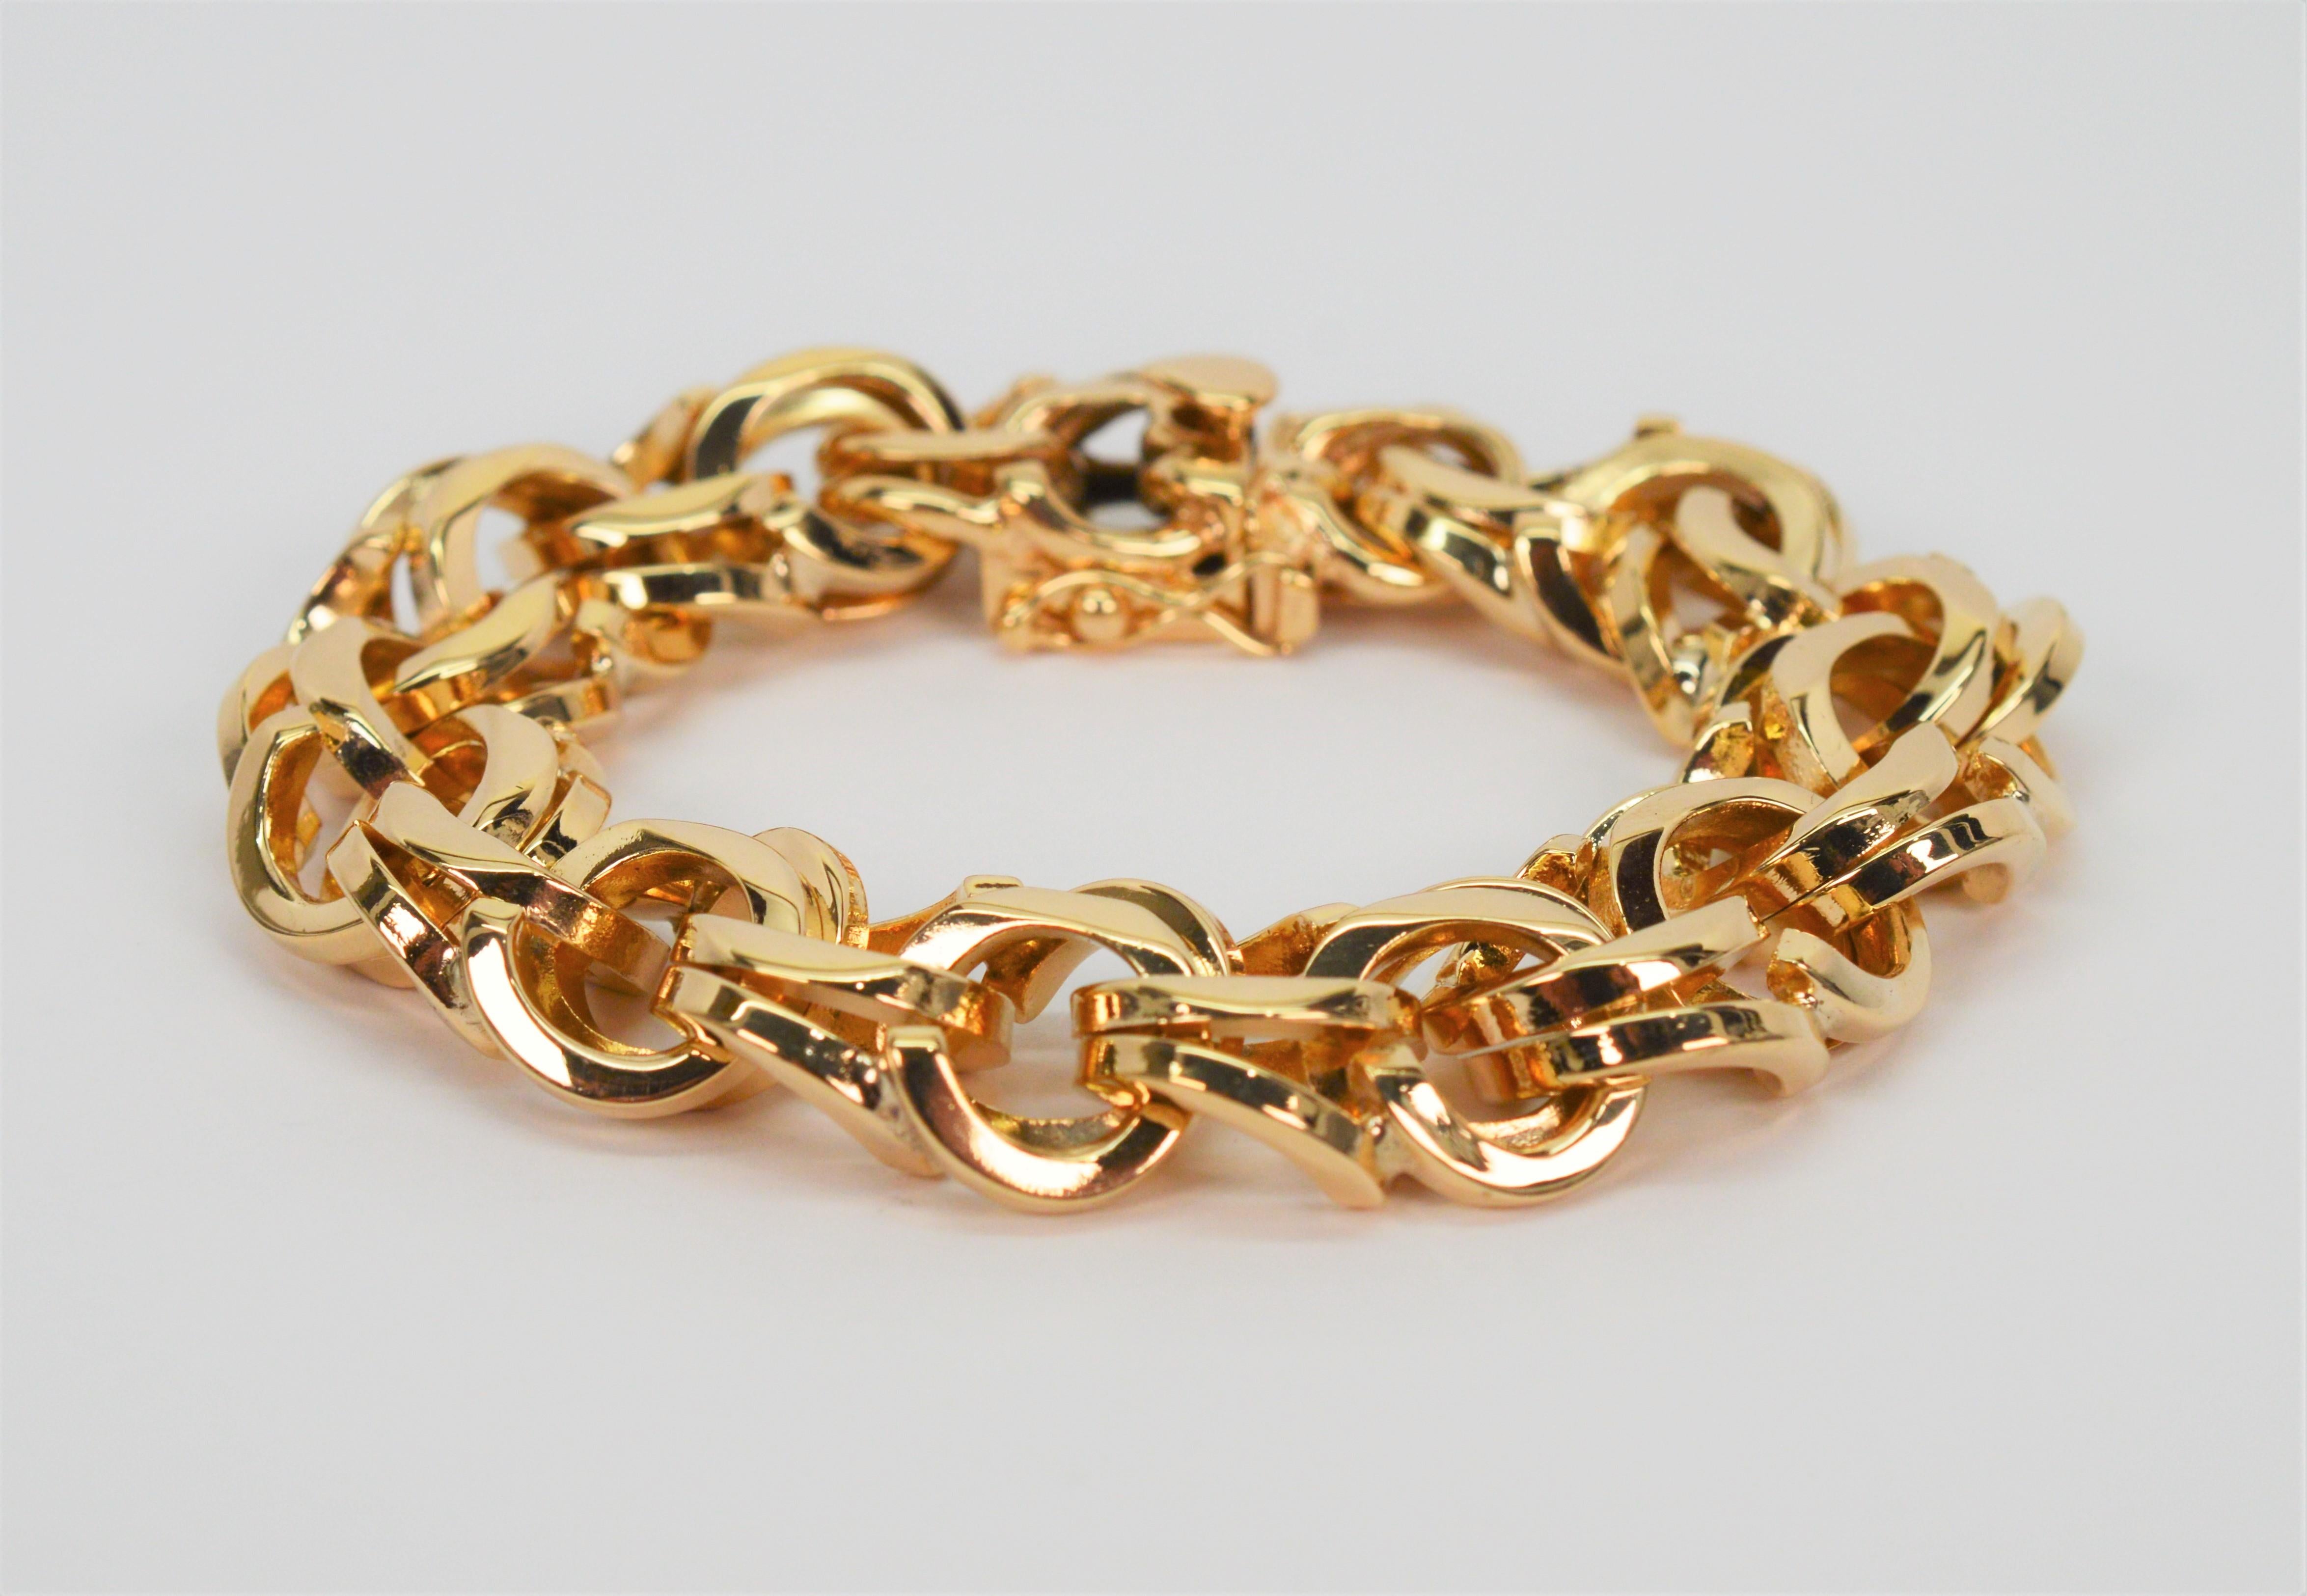 A timeless classic. Crafted in a heavy gauge highly polished fourteen karat 14K yellow gold, this fine quality 1950's vintage bracelet makes a bold statement with congruent 16mm double loop links to create this stunning 7 inch bracelet. The width of